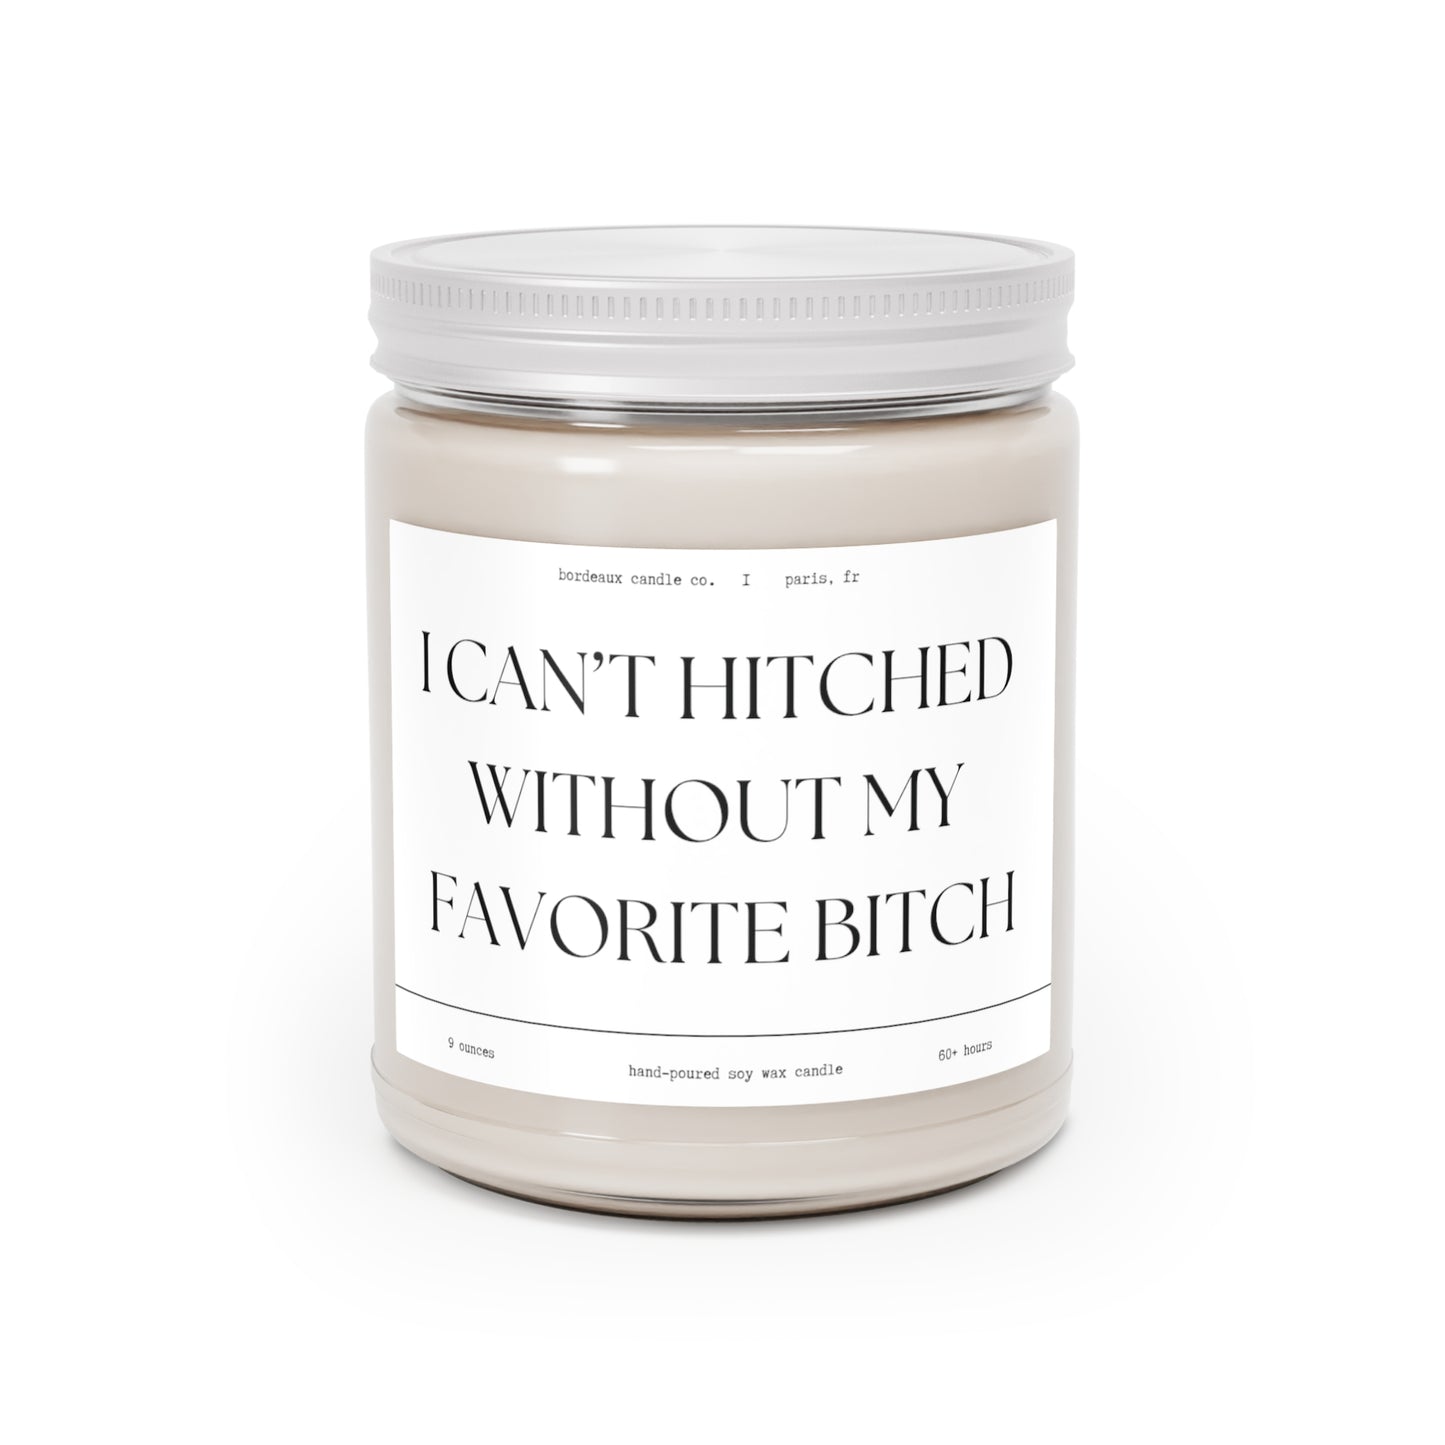 Can't Get Hitched without my fav, Scented Candle, 9oz,